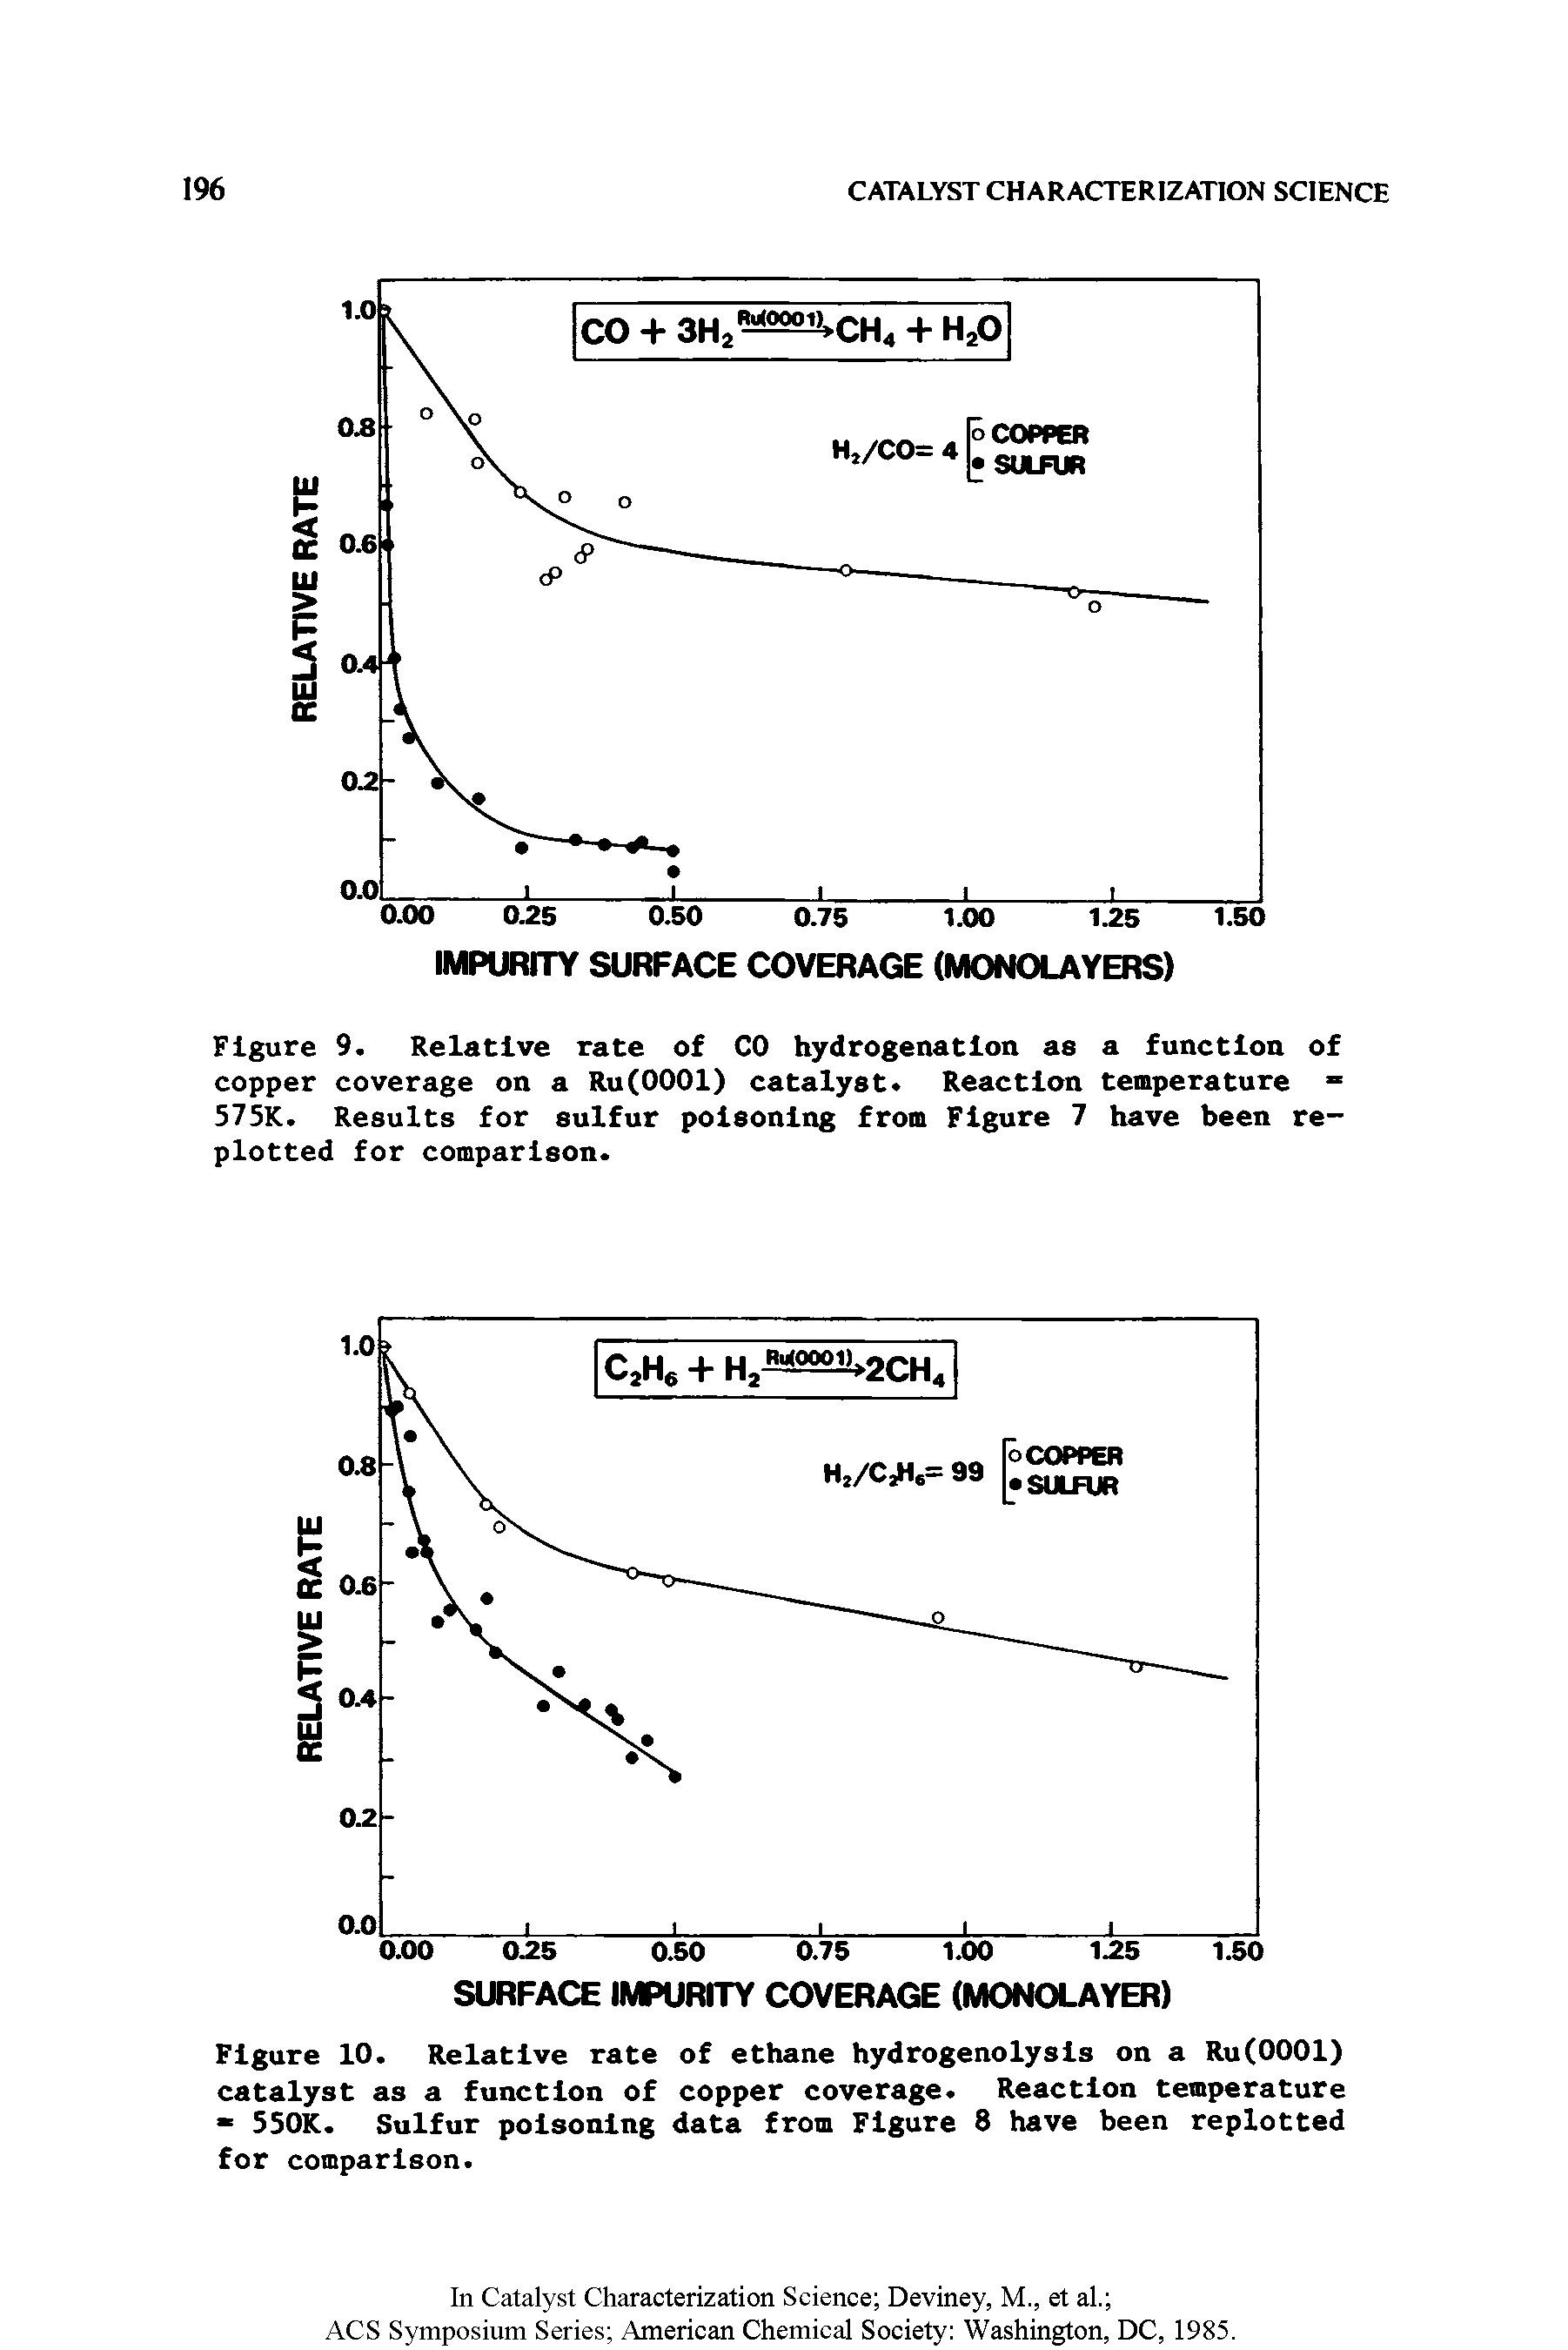 Figure 9. Relative rate of CO hydrogenation as a function of copper coverage on a Ru(OOOl) catalyst Reaction temperature 575K. Results for sulfur poisoning from Figure 7 have been replotted for comparison.